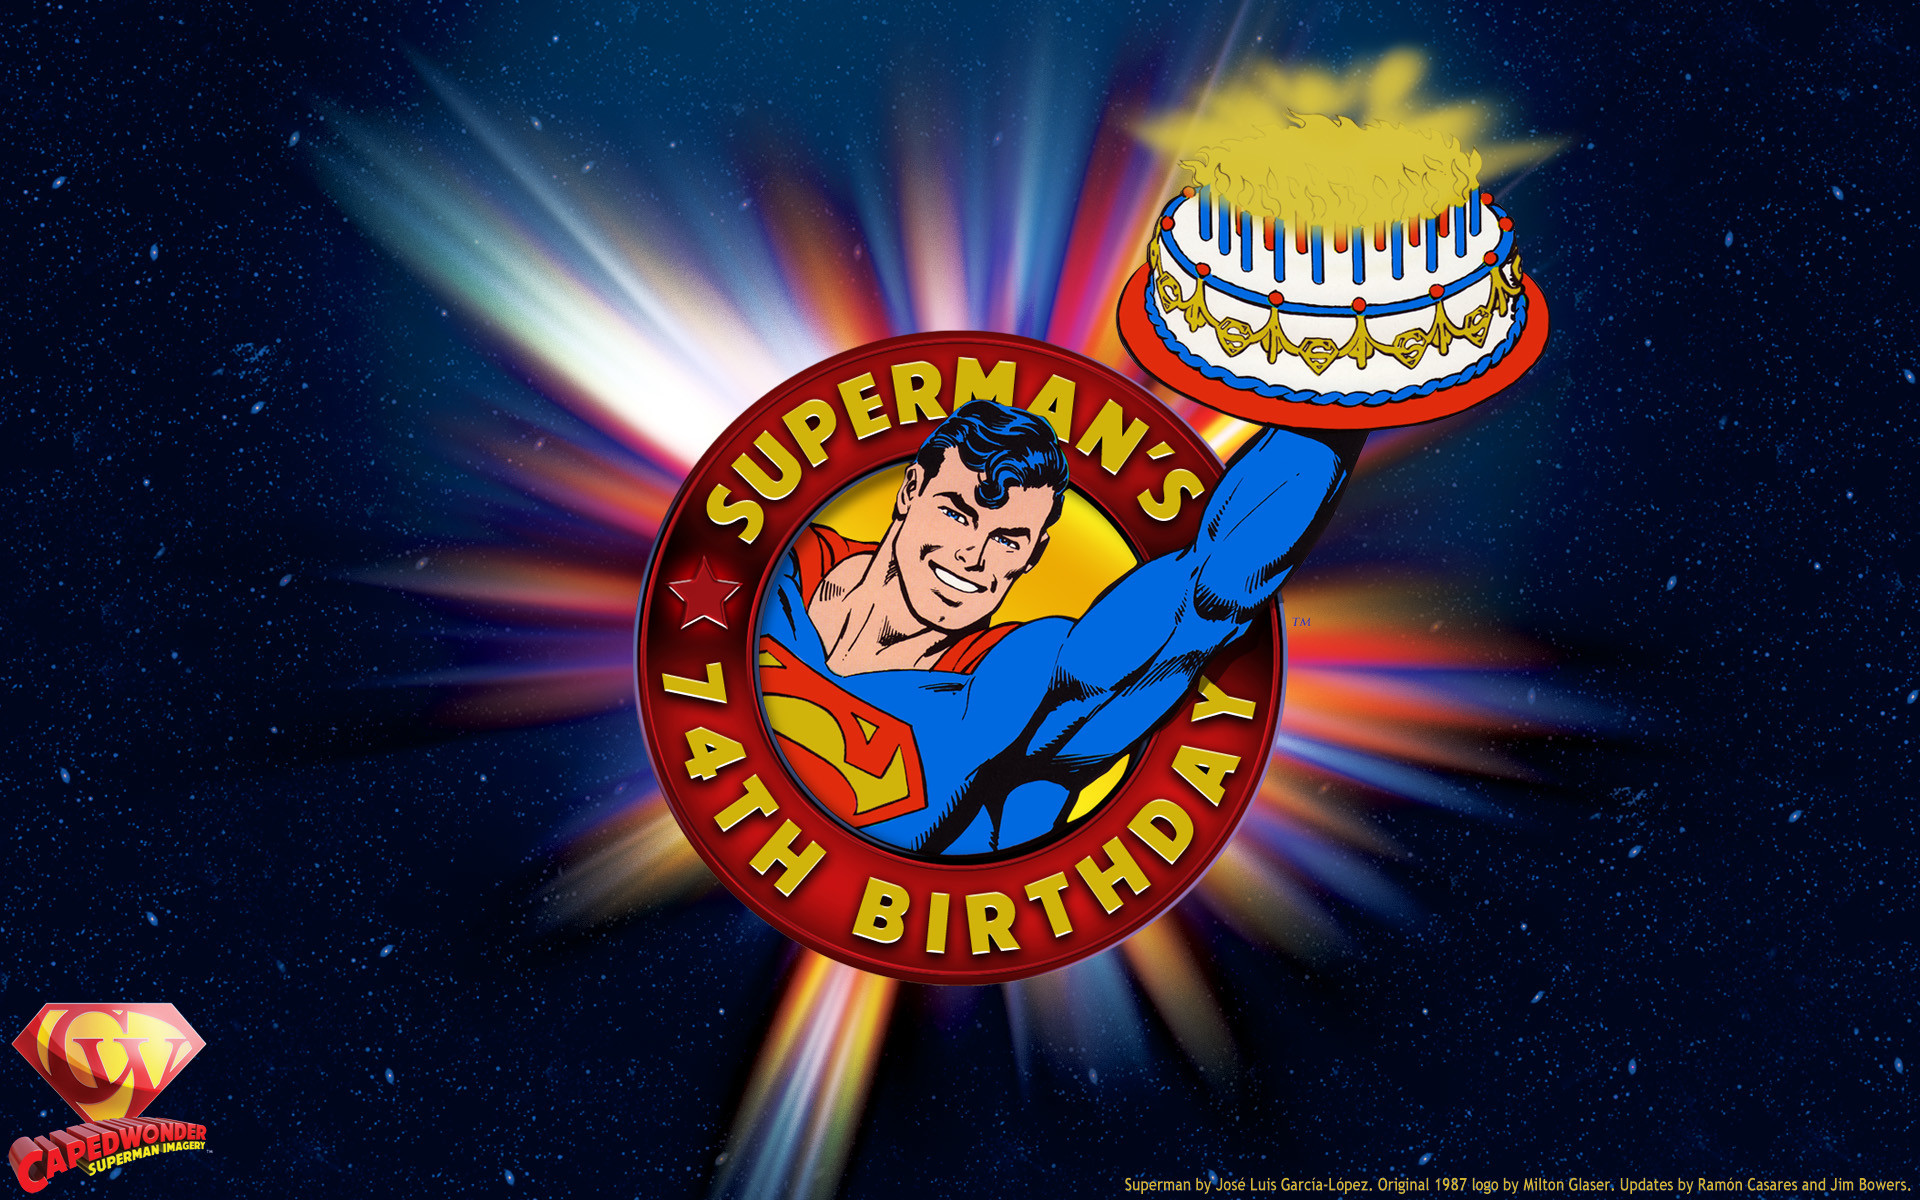 1920x1200 He also designed Superman's 50th birthday logo seen in DC Comics' official .